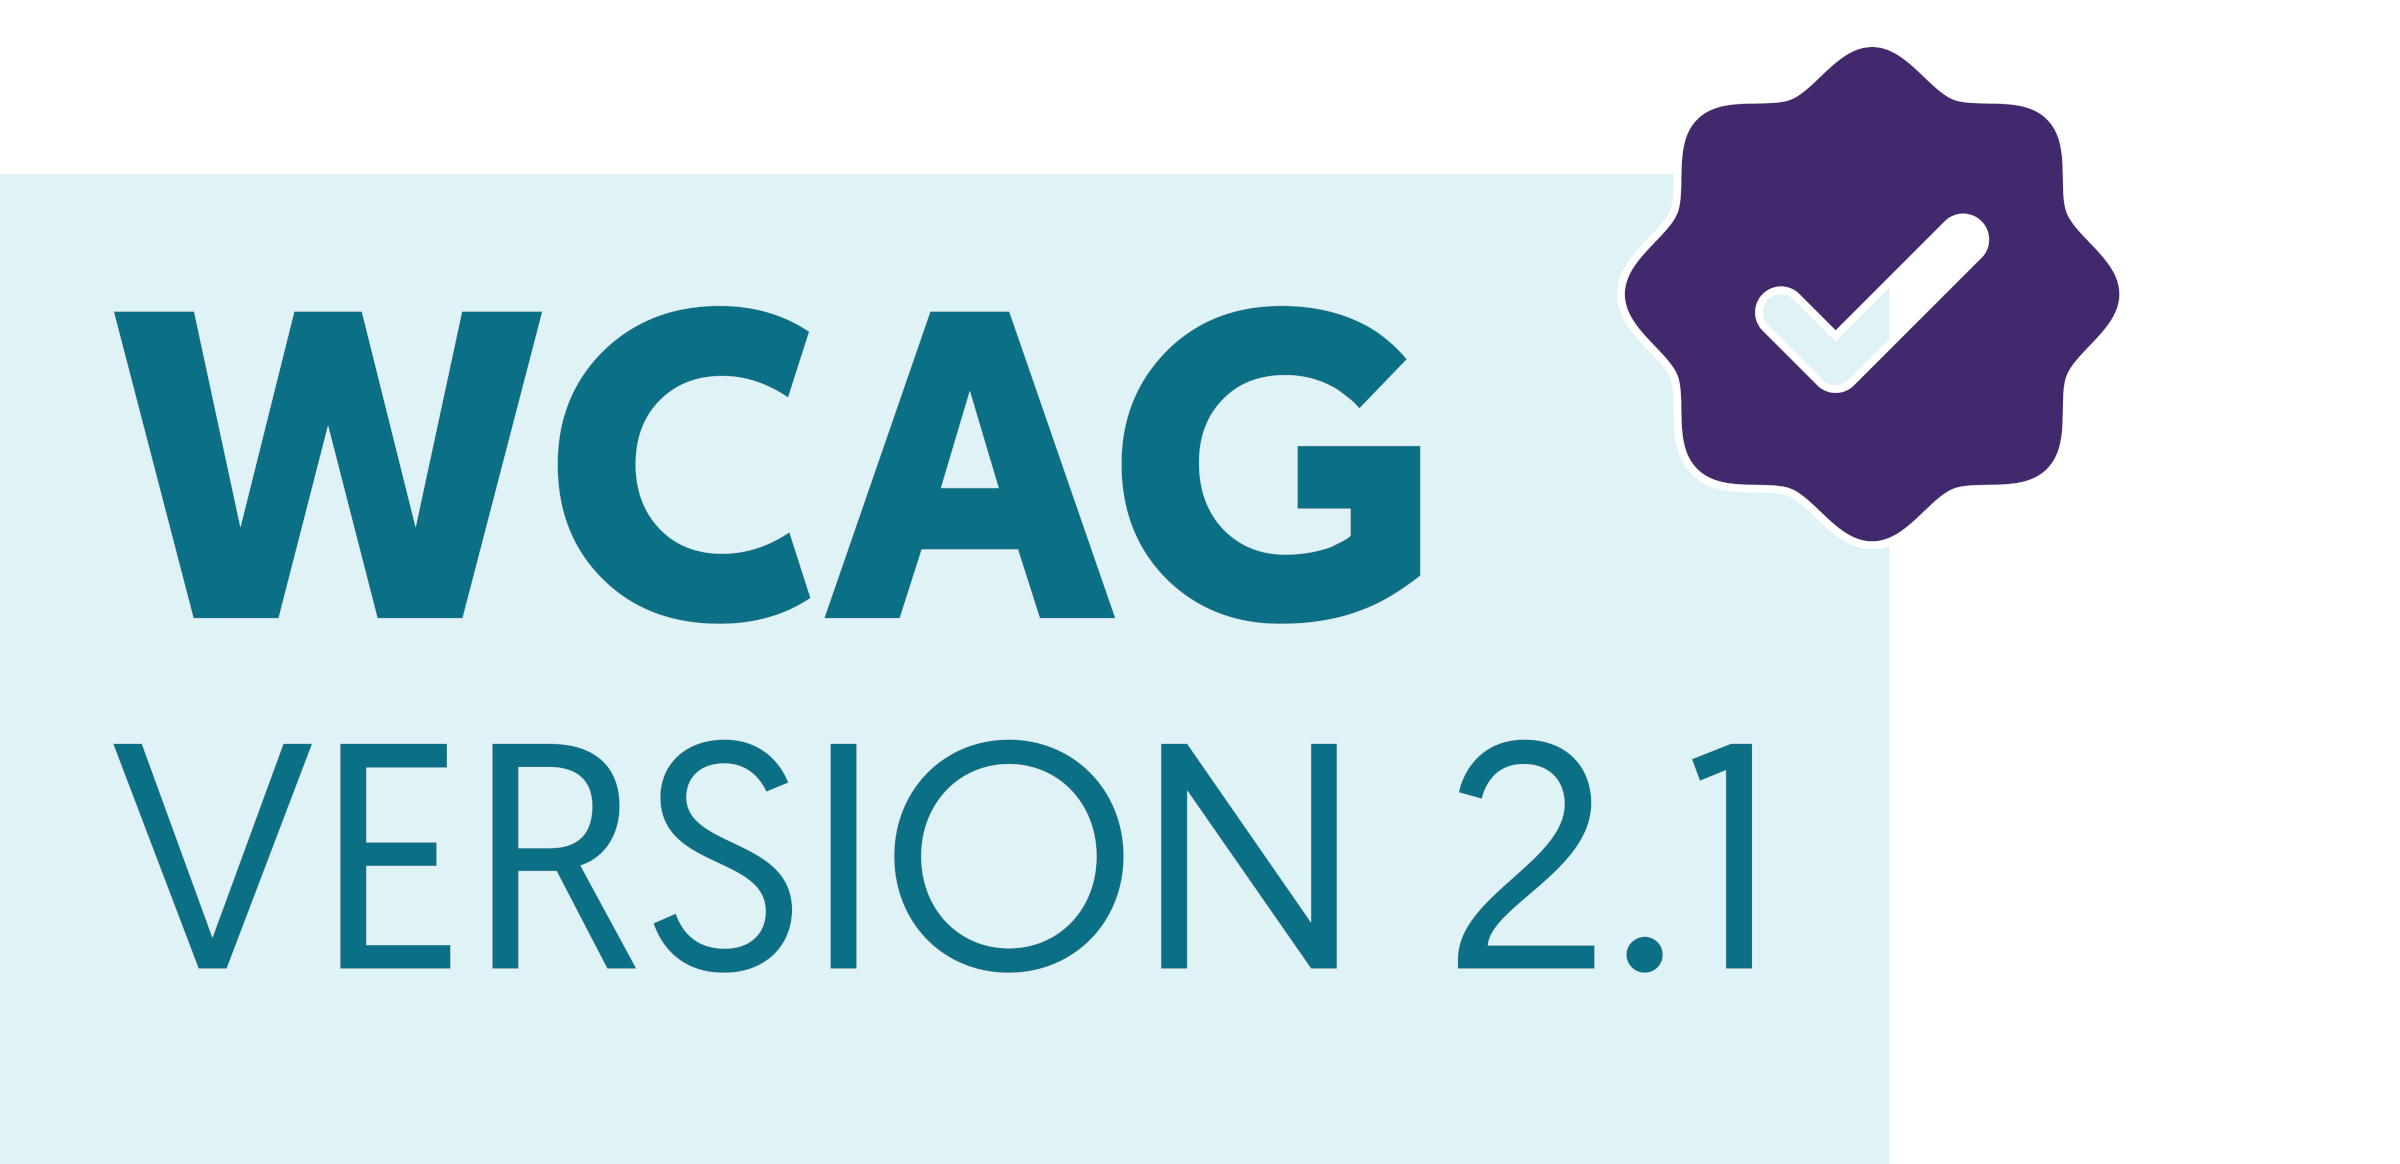 WCAG Version 2.1 logo with a checkmark in the top right corner.